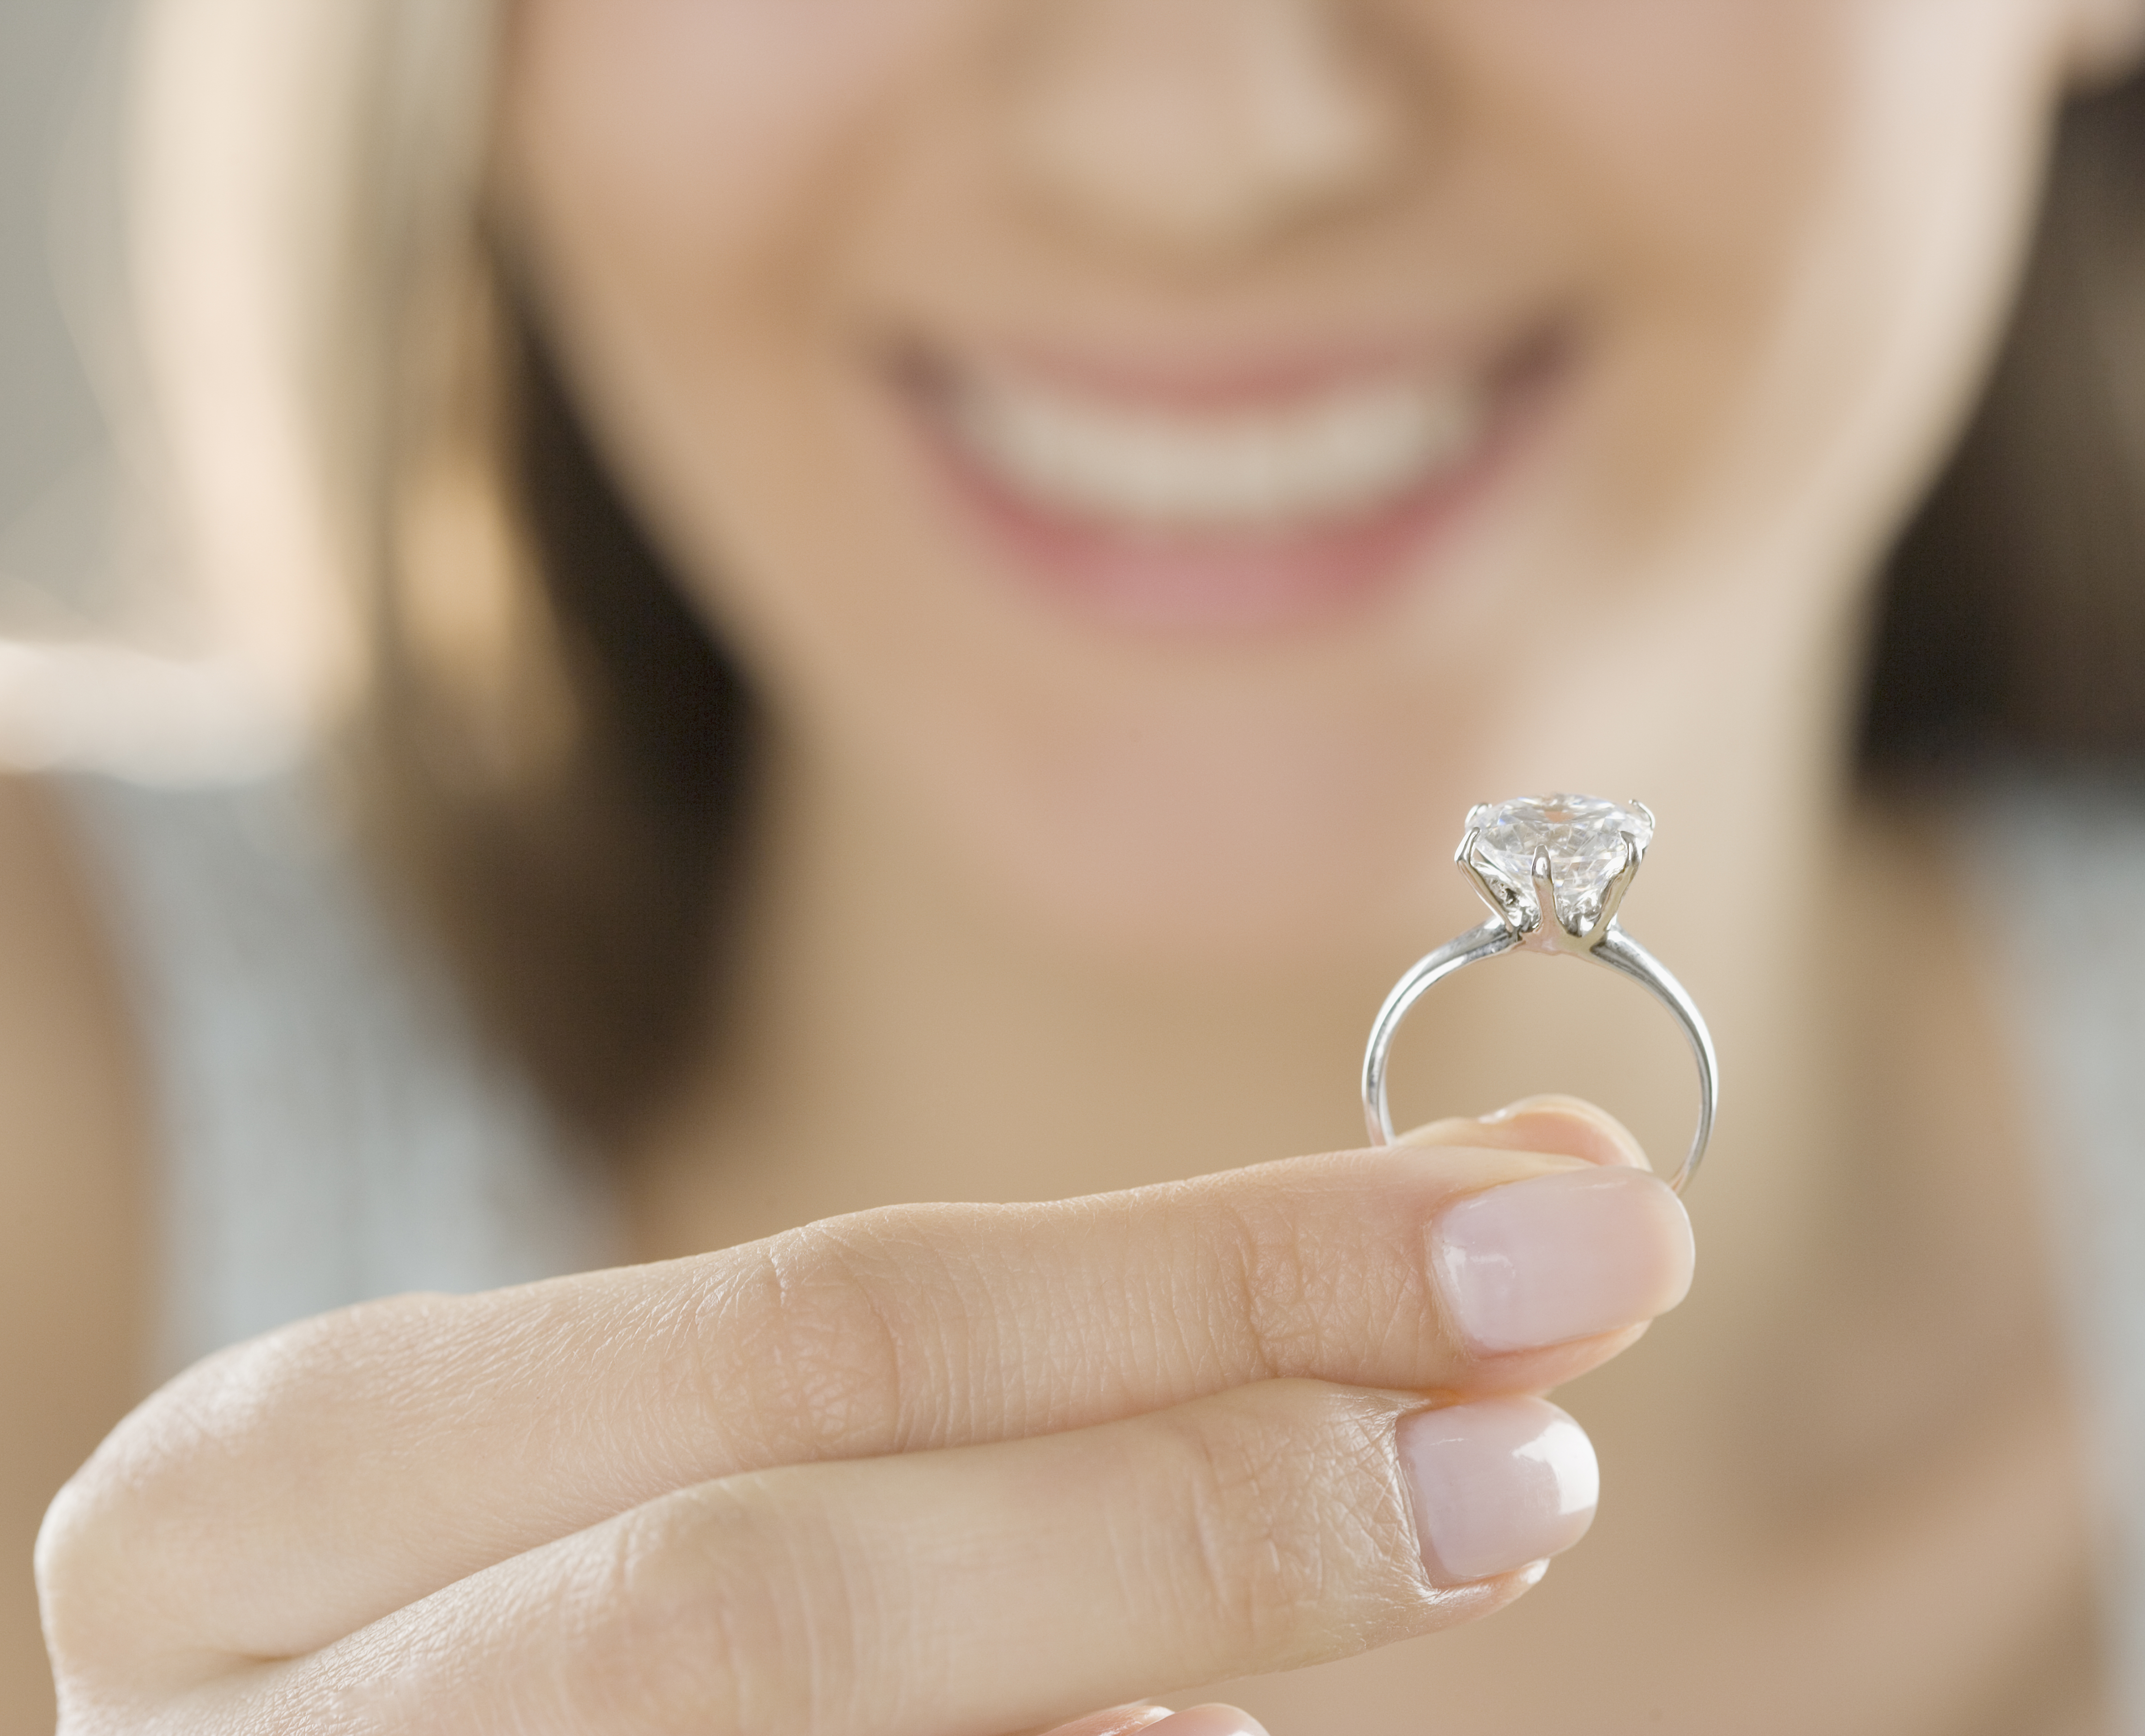 A woman with a ring | Source: Getty Images